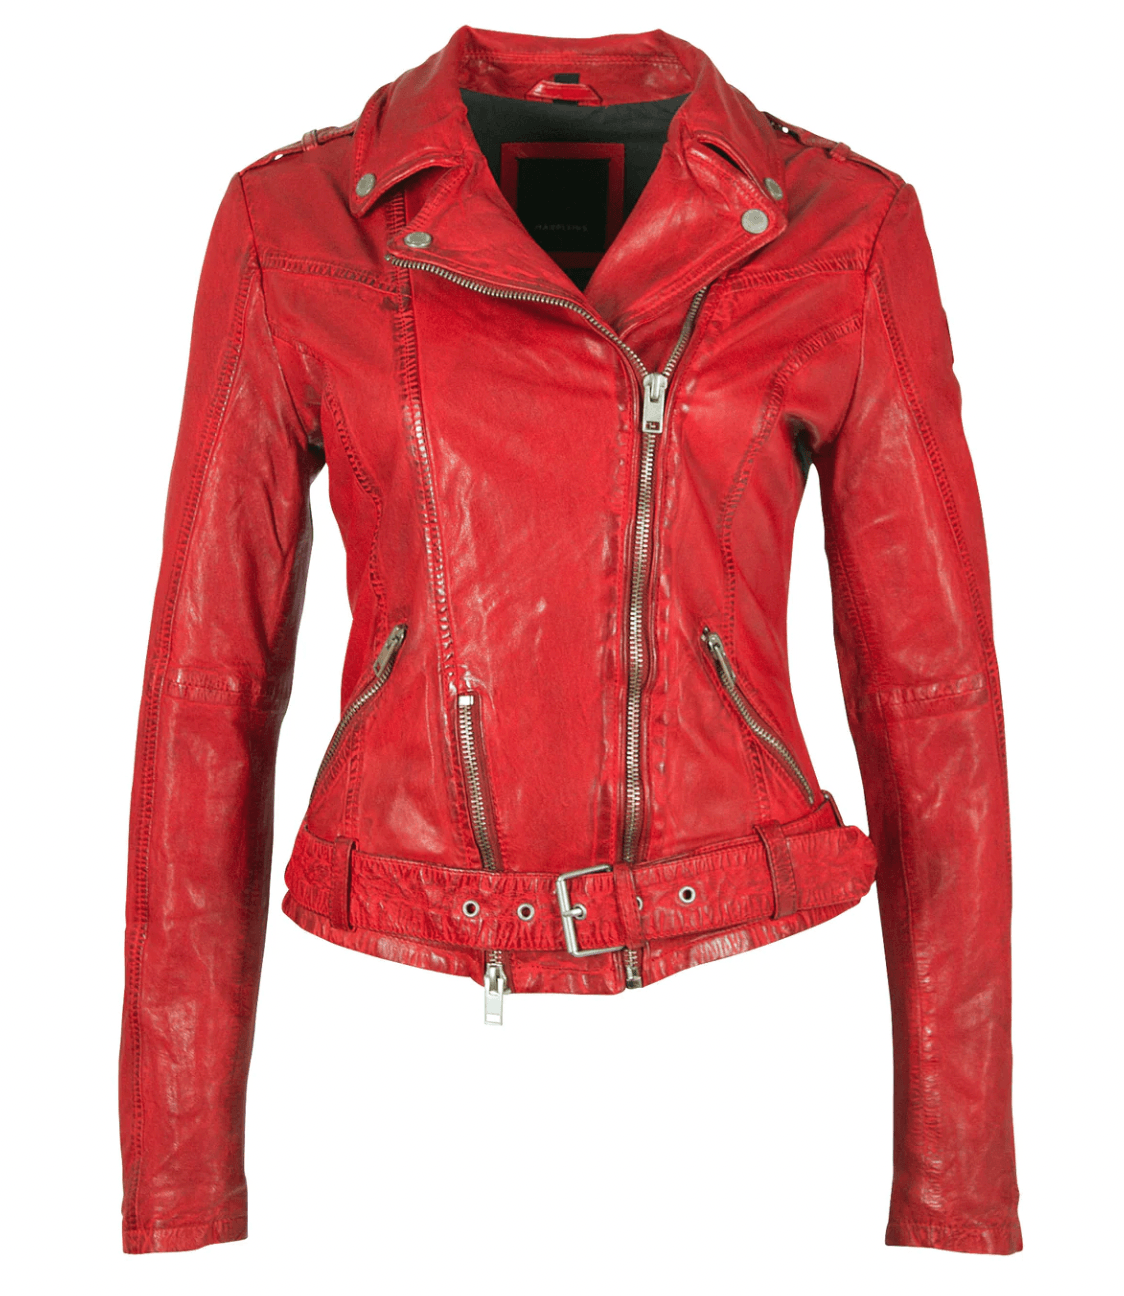 Wild Leather Jacket by Mauritius - Haven